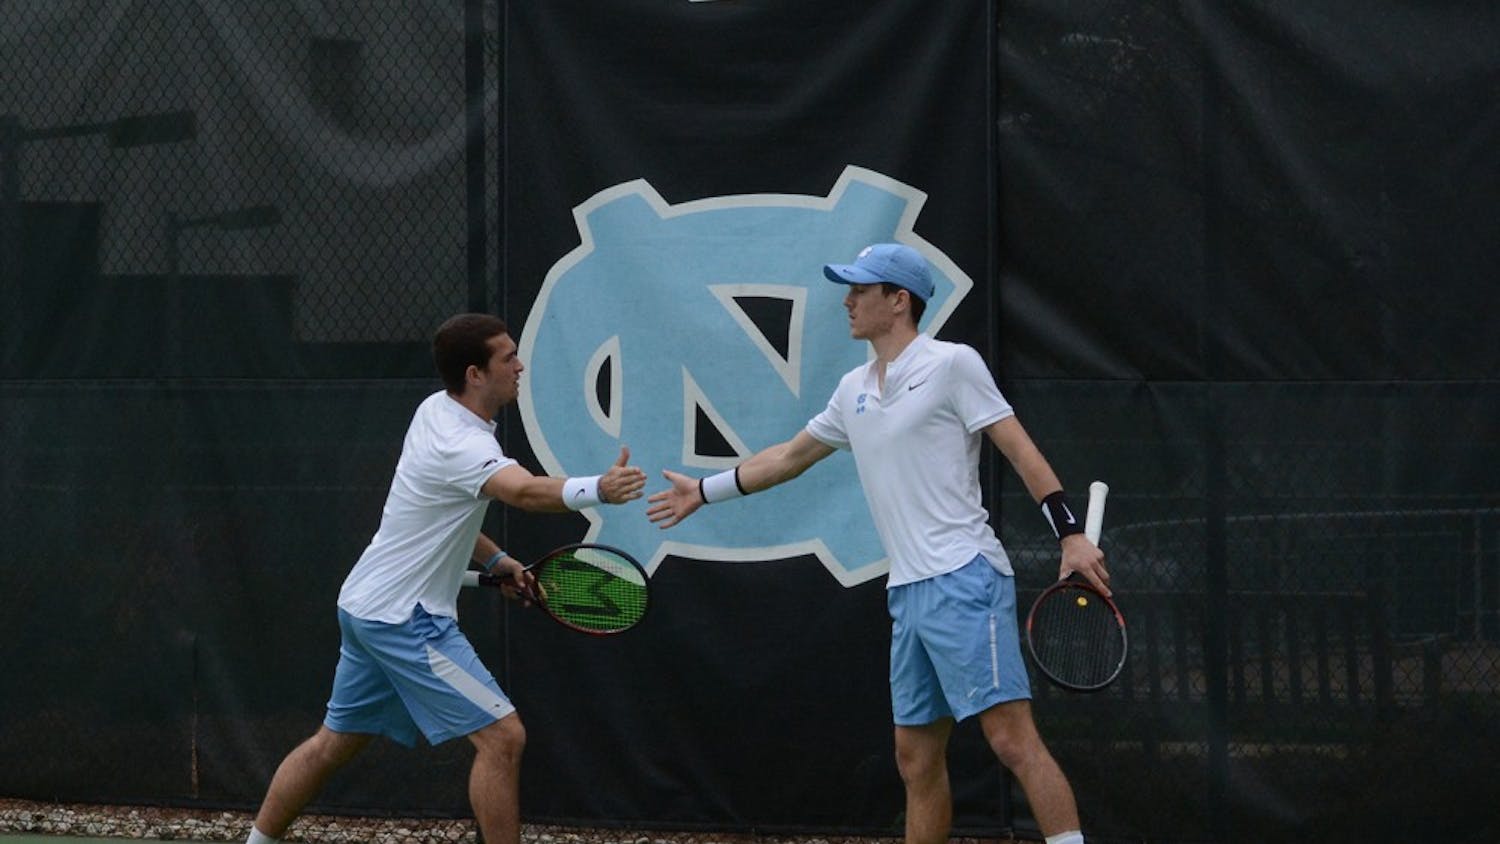 Will Blumberg (left) high fives doubles partner Robert Kelly (right) in Saturday’s doubles match against Tulsa.